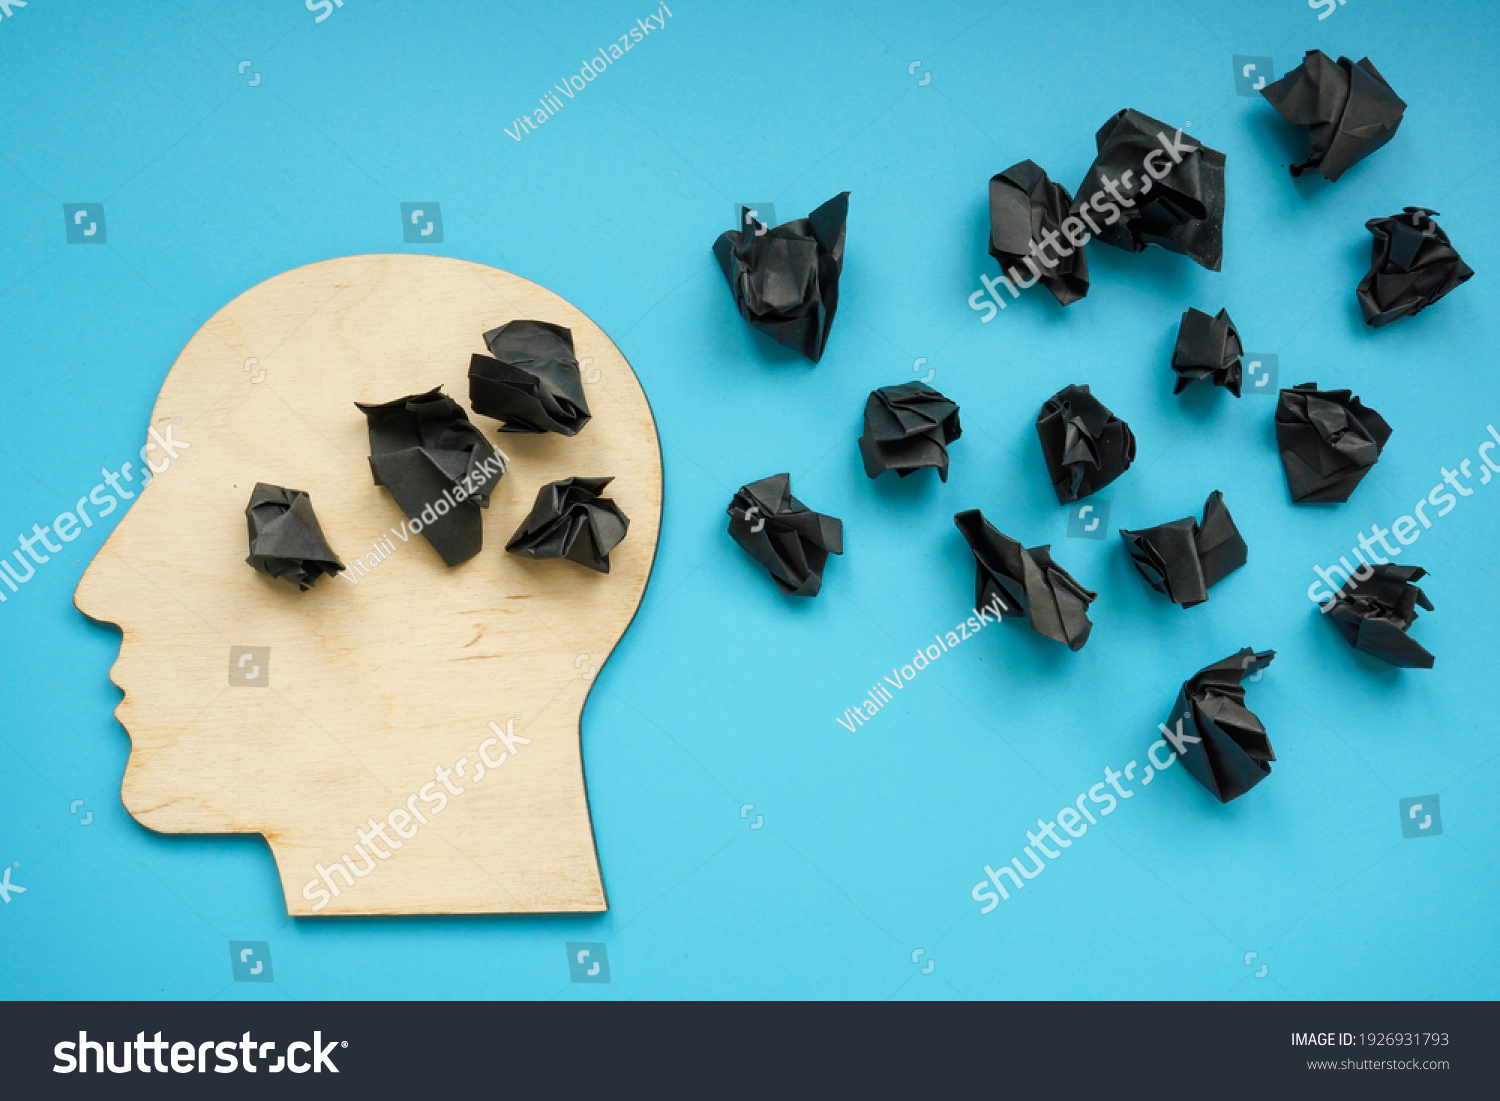 Head shape with black paper balls as symbol of depression and negative thoughts. #1926931793